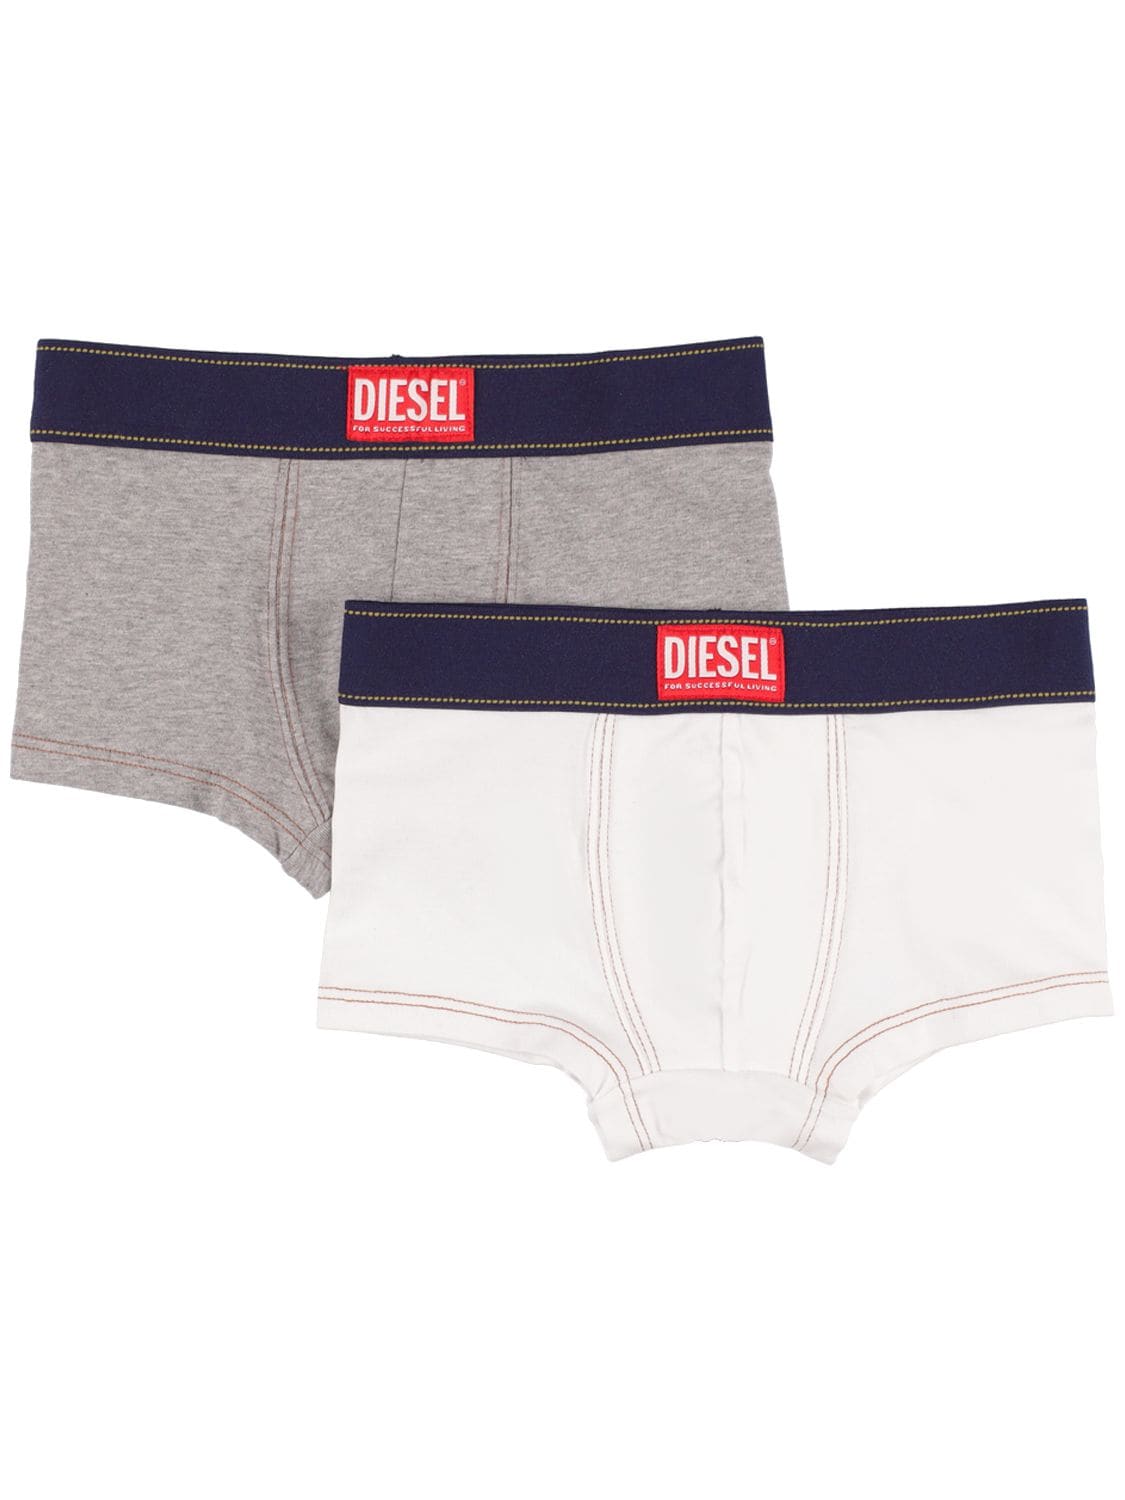 Diesel Kids' Pack Of 2 Cotton Jersey Boxer Briefs In Multicolor